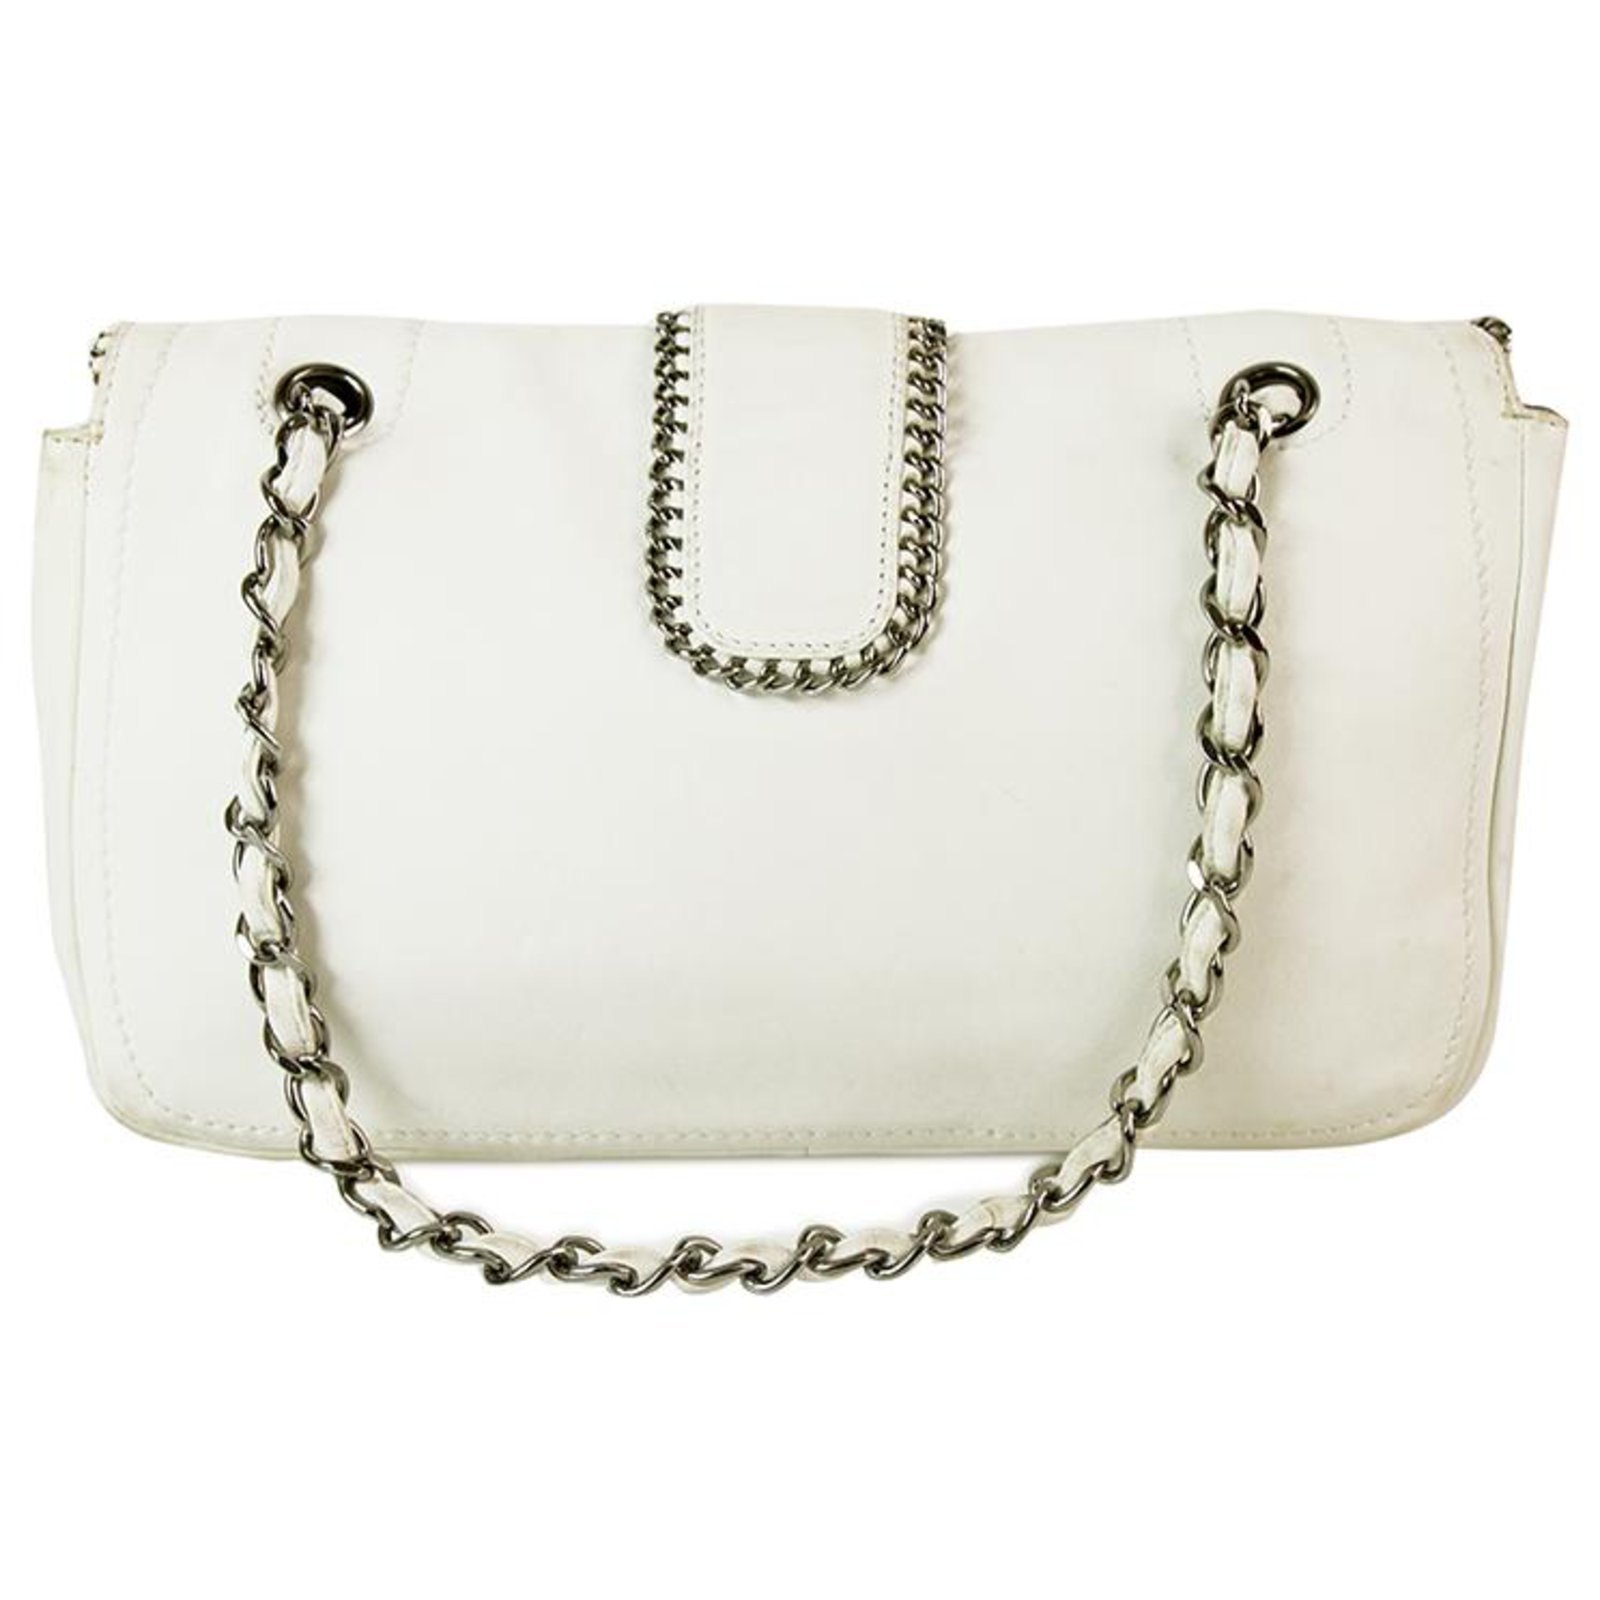 Chanel White Leather Chain Around Single Flap Bag with gunmetal hardware